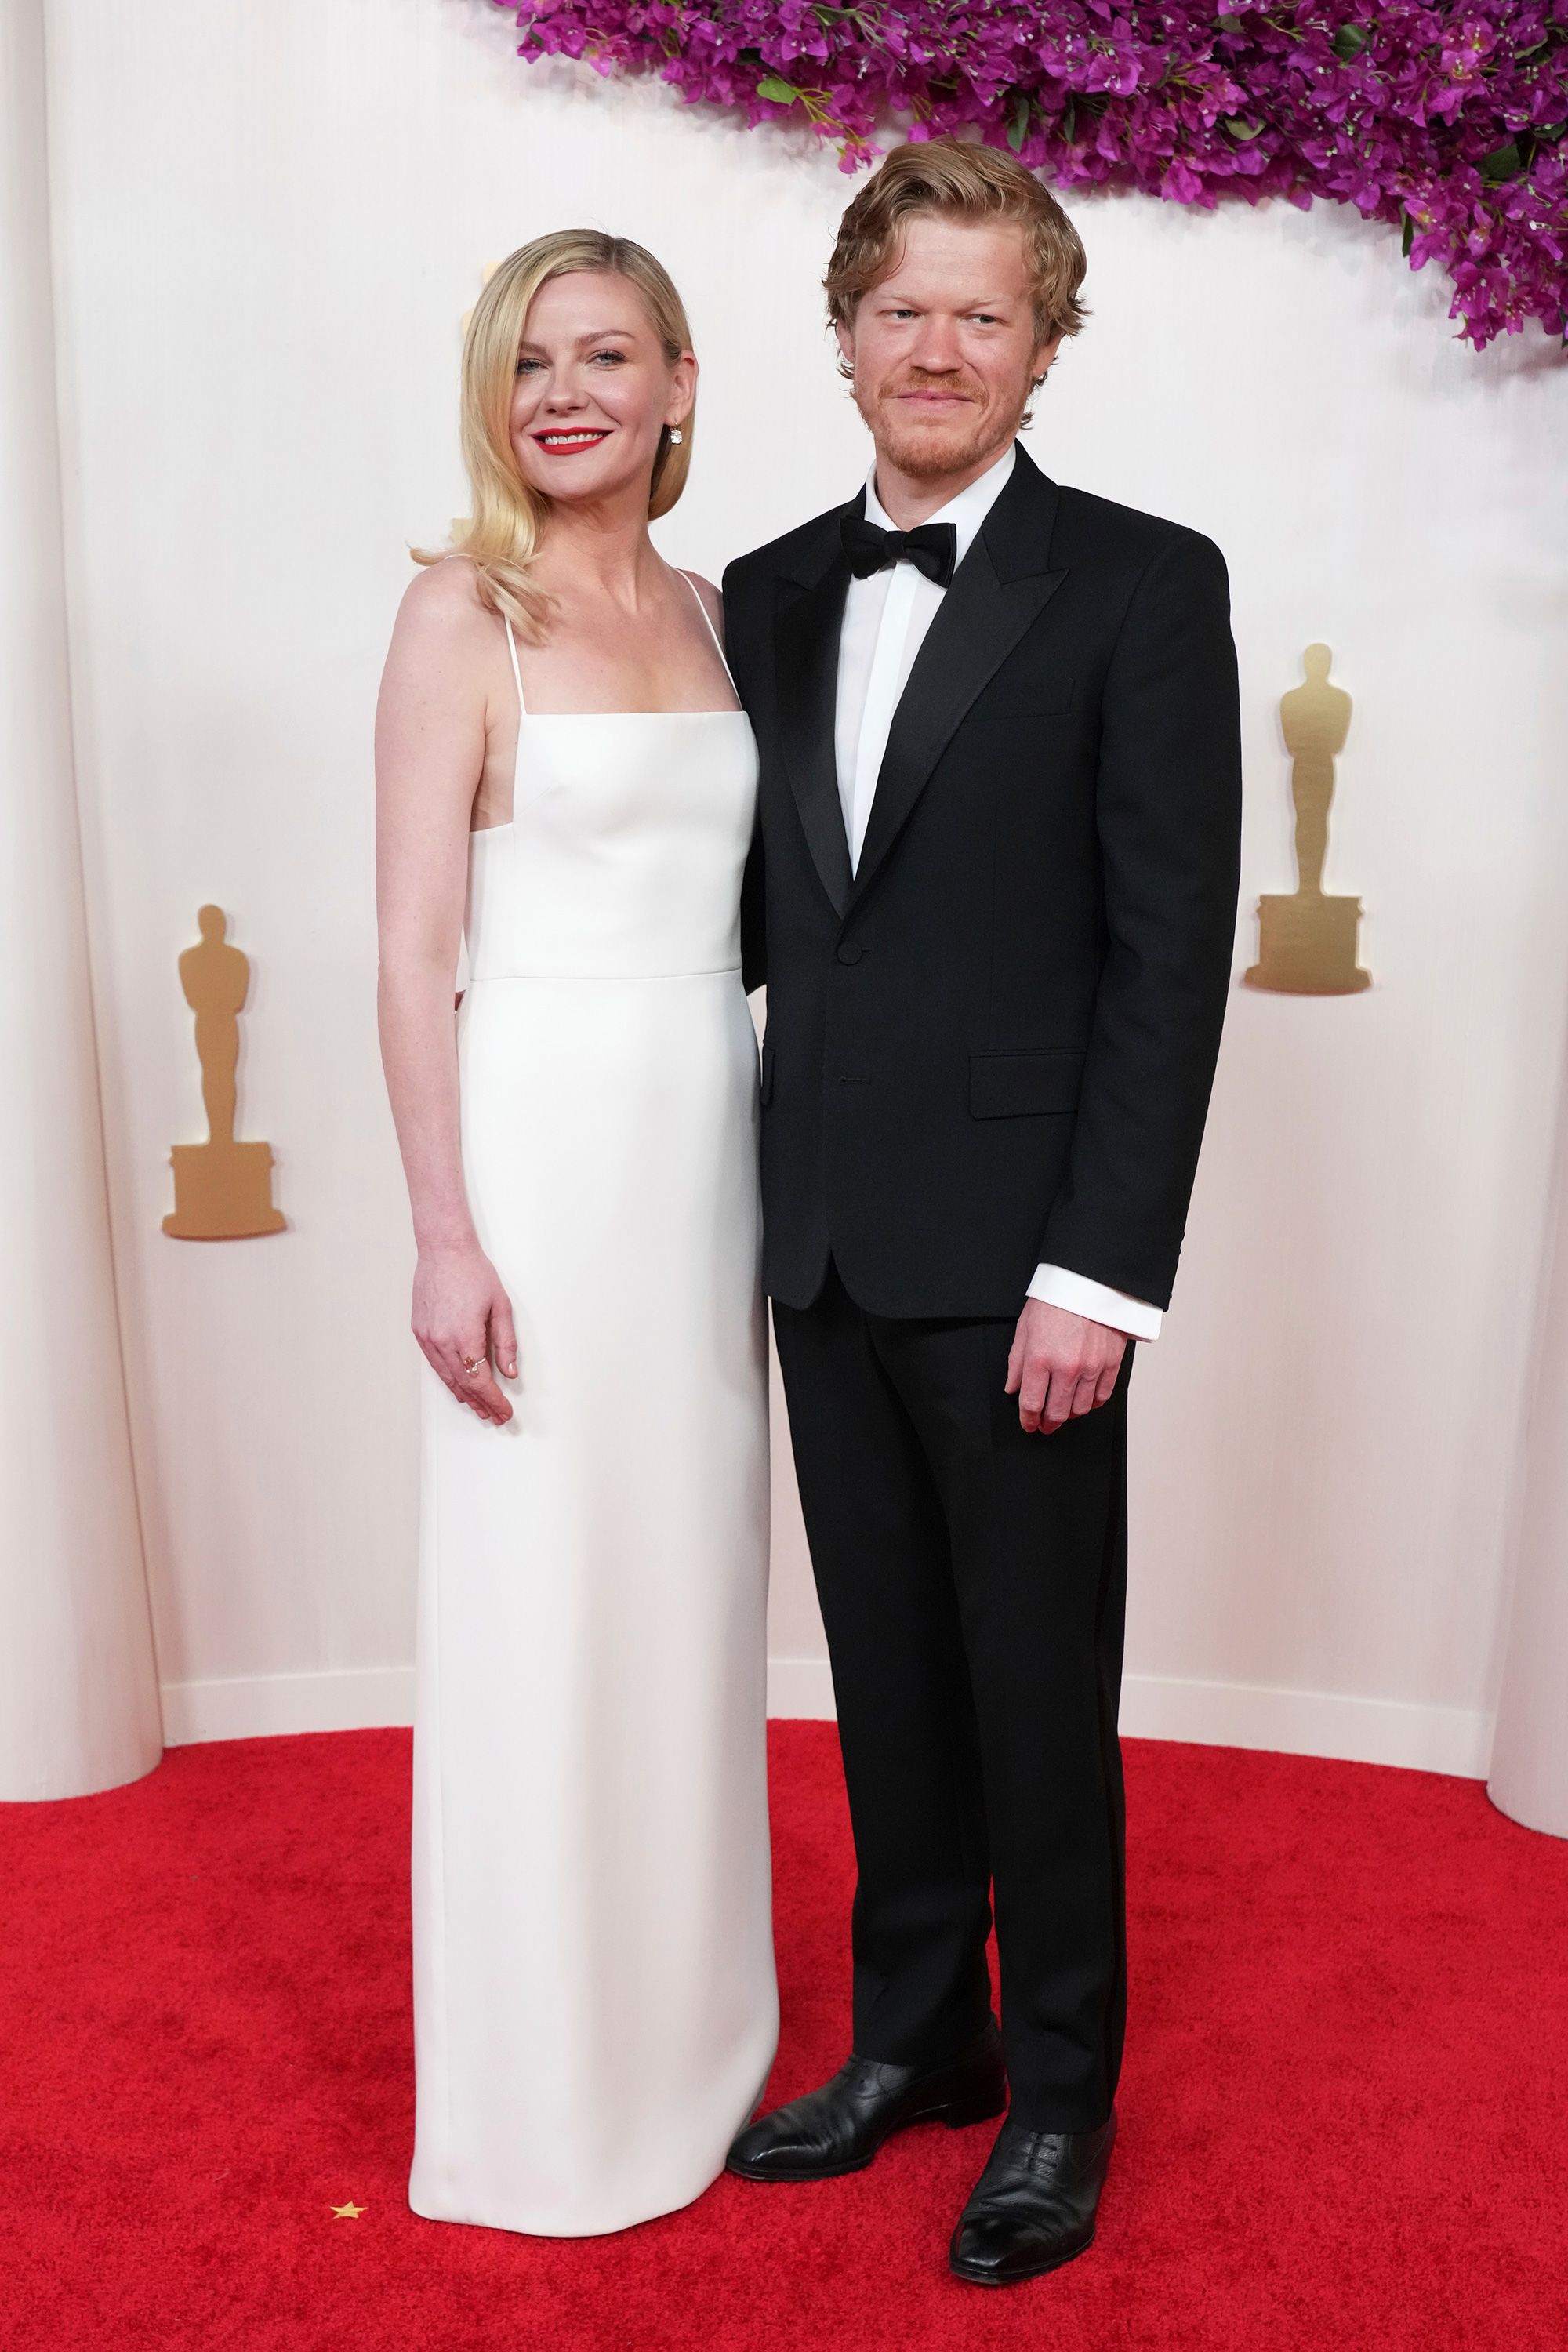 Kirsten Dunst, who arrived with her husband Jesse Plemons, wore an elegant Gucci dress with a plunging neckline and an elegant floor-length silhouette.  The actor completed the look with Fred Leighton jewelry.